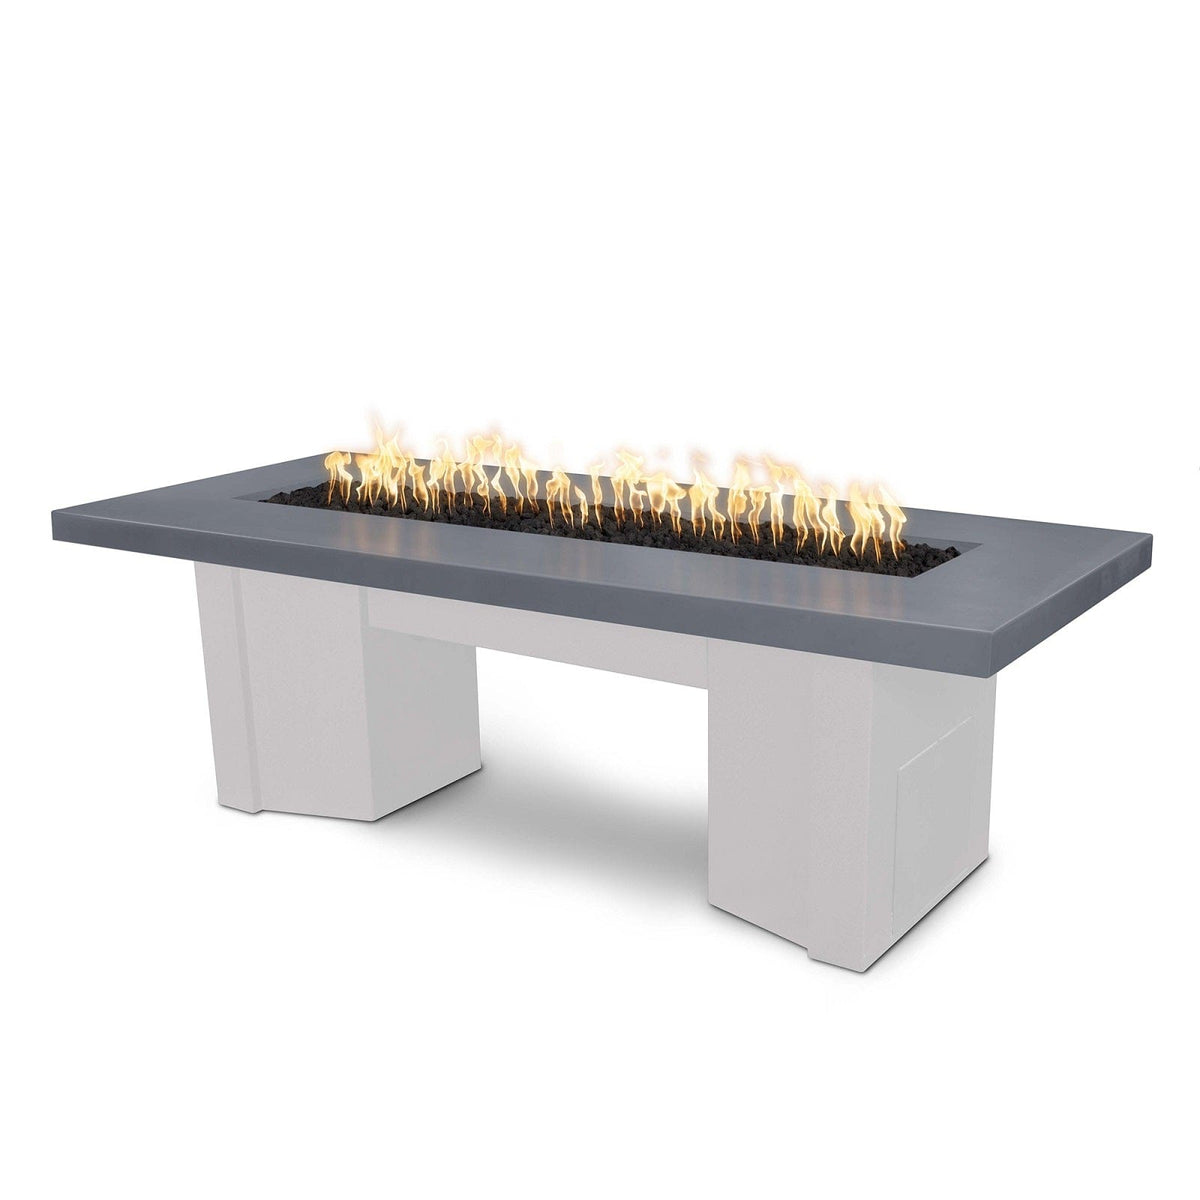 The Outdoor Plus Fire Features Gray (-GRY) / White Powder Coated Steel (-WHT) The Outdoor Plus 78&quot; Alameda Fire Table Smooth Concrete in Natural Gas - Match Lit with Flame Sense System / OPT-ALMGFRC78FSML-NG